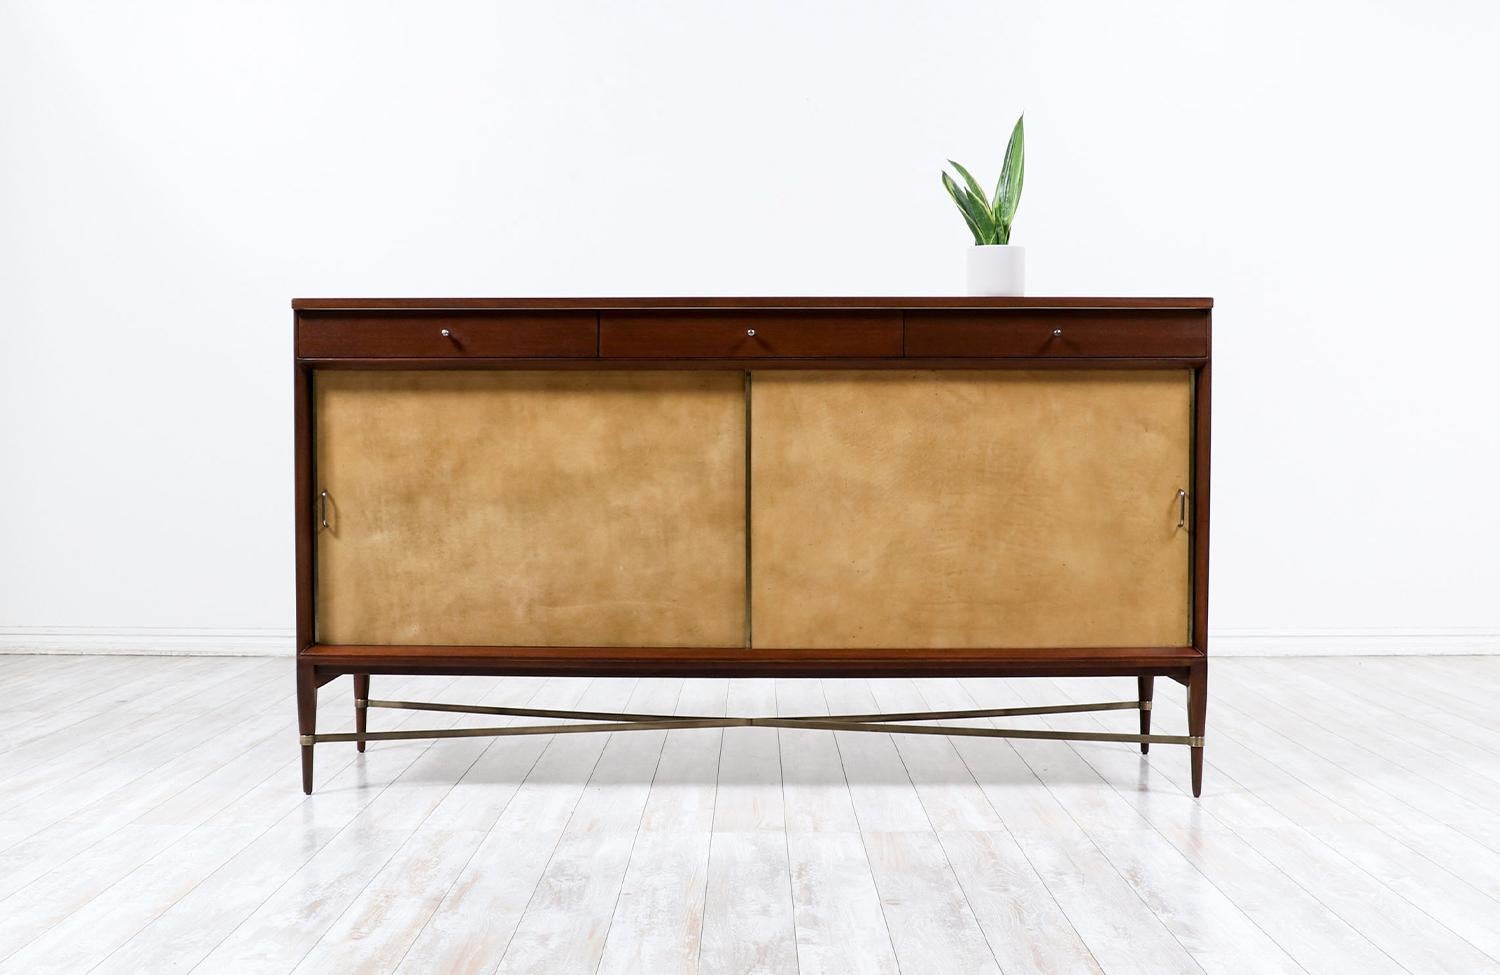 Introducing the exquisite Paul McCobb “Irwin Collection” Credenza with Leather Doors & Brass Accents for Calvin Furniture. With its exceptional design and the use of high-quality materials, this credenza exudes elegance and sophistication.
This